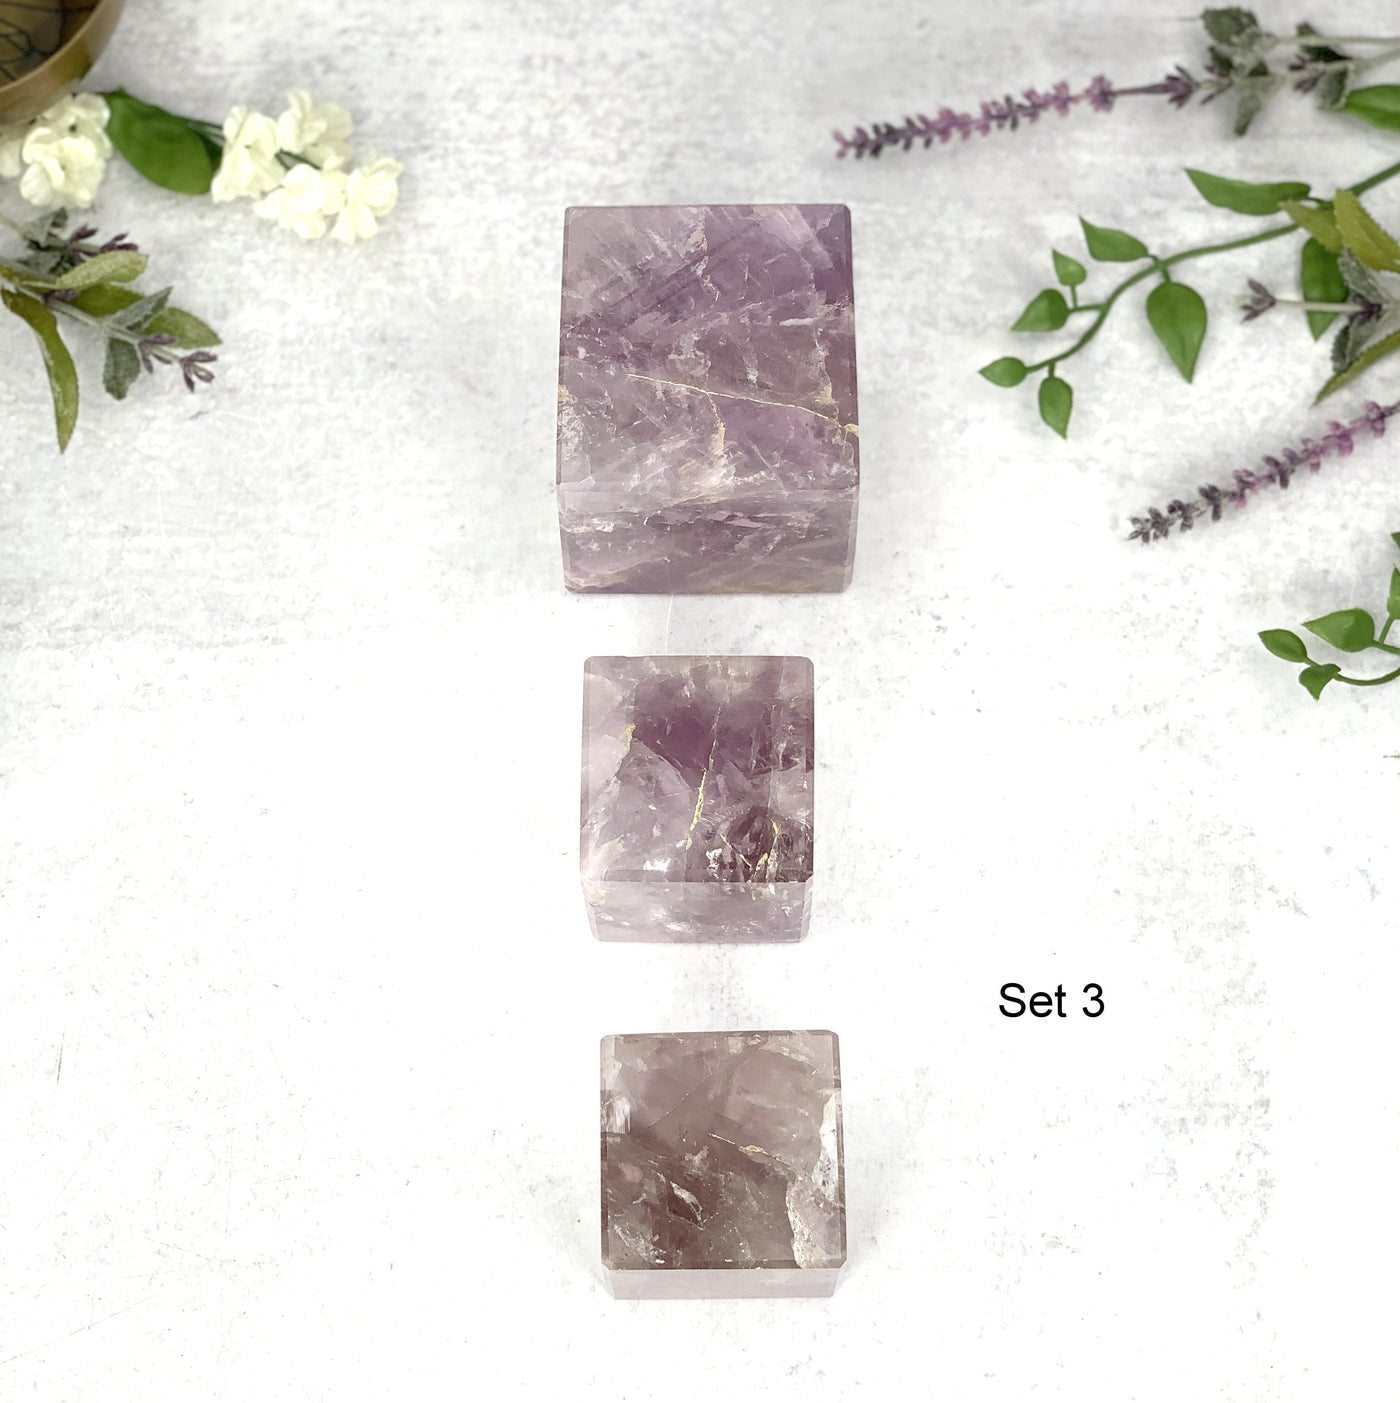 Set 3 close up  of the 3 pc Amethyst Cubes.